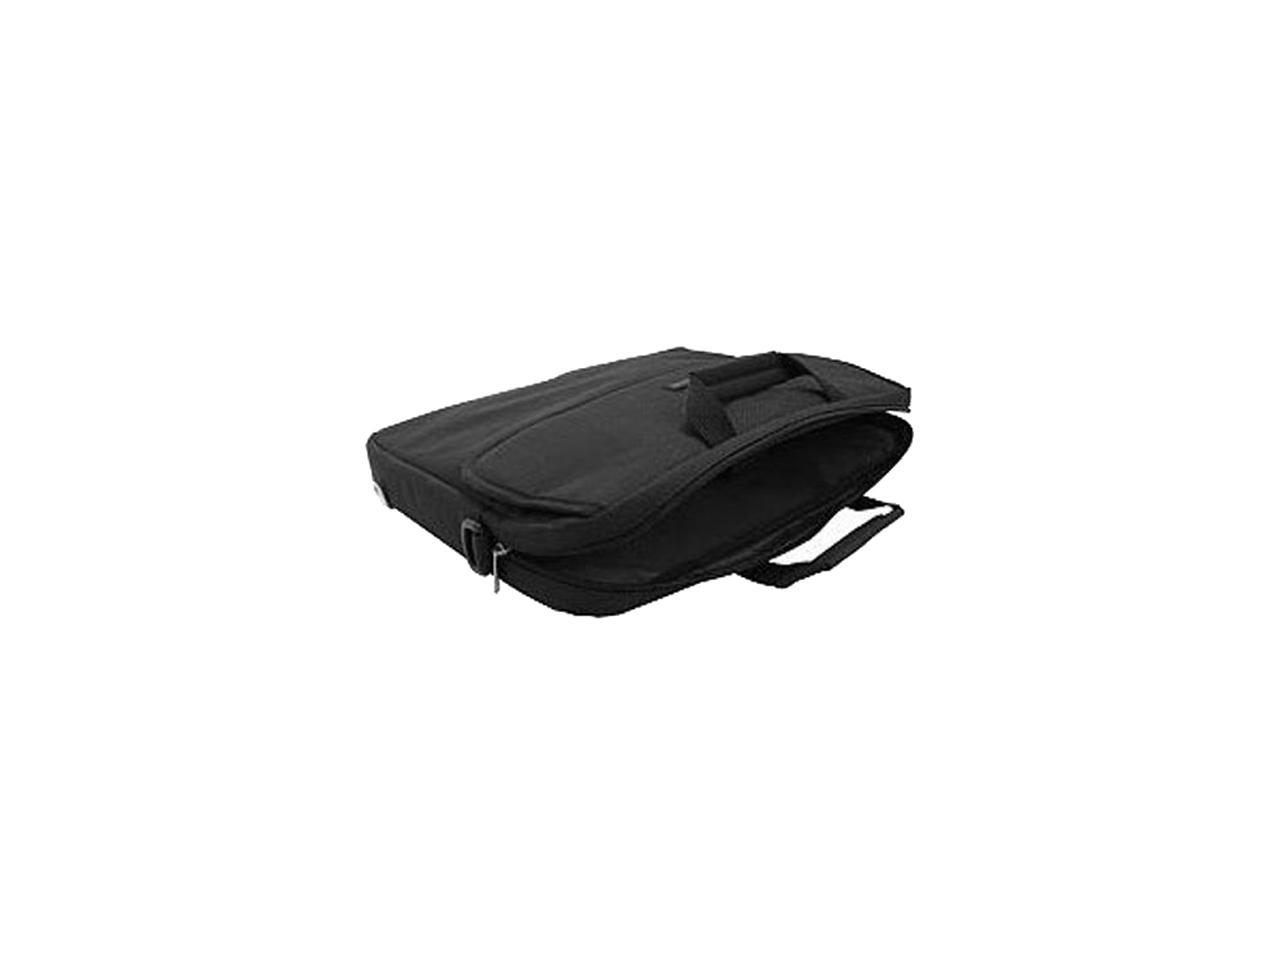 Kensington Classic Sp17 Carrying Case (Sleeve) For 17" Notebook - Black